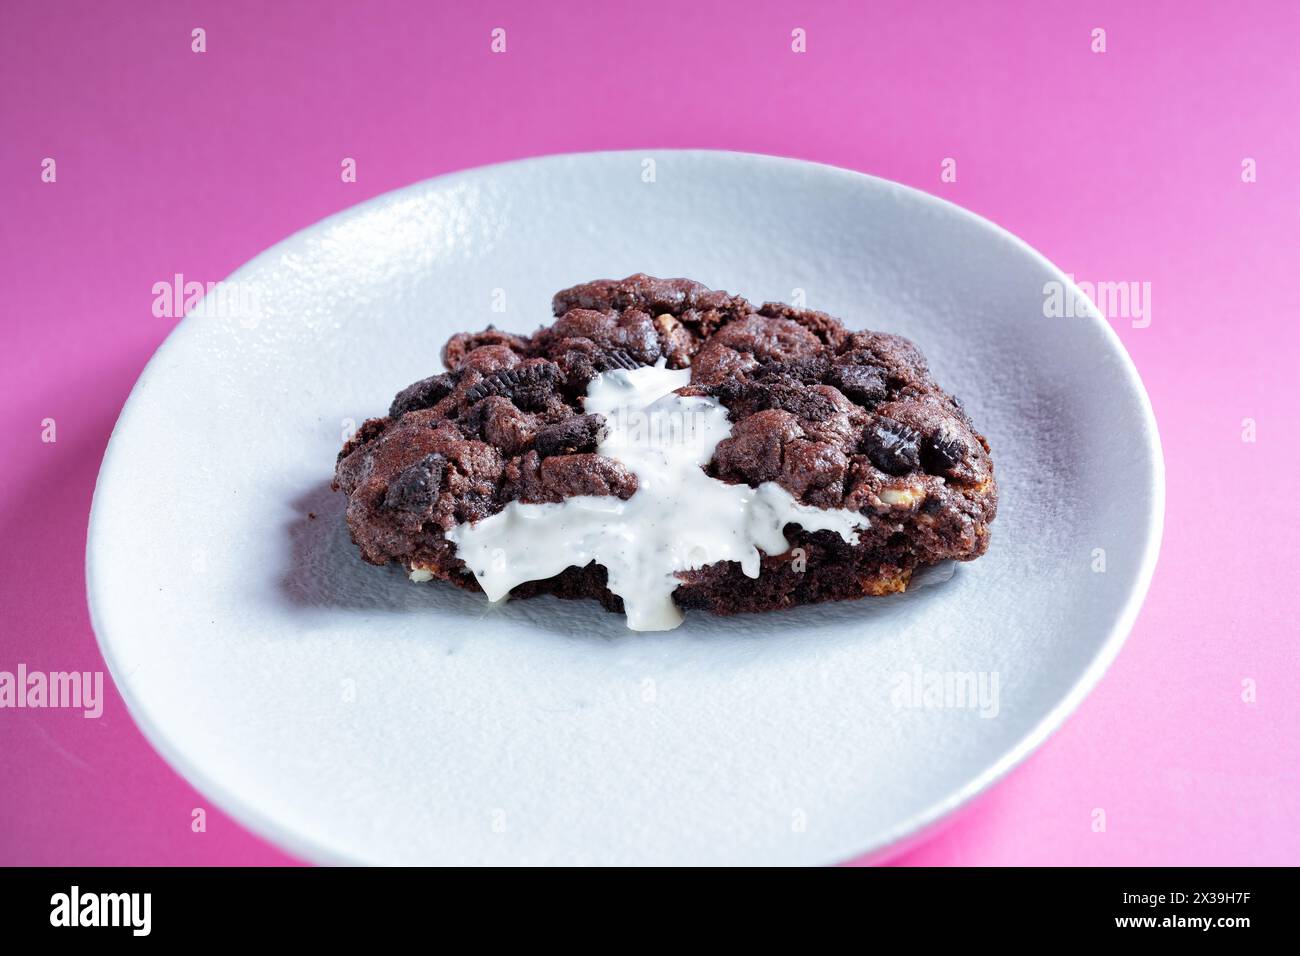 A large freshly made warm NY style Oreo Cookie halved and served on a plate. The cookie is oozing a white chocolate cream filling Stock Photo